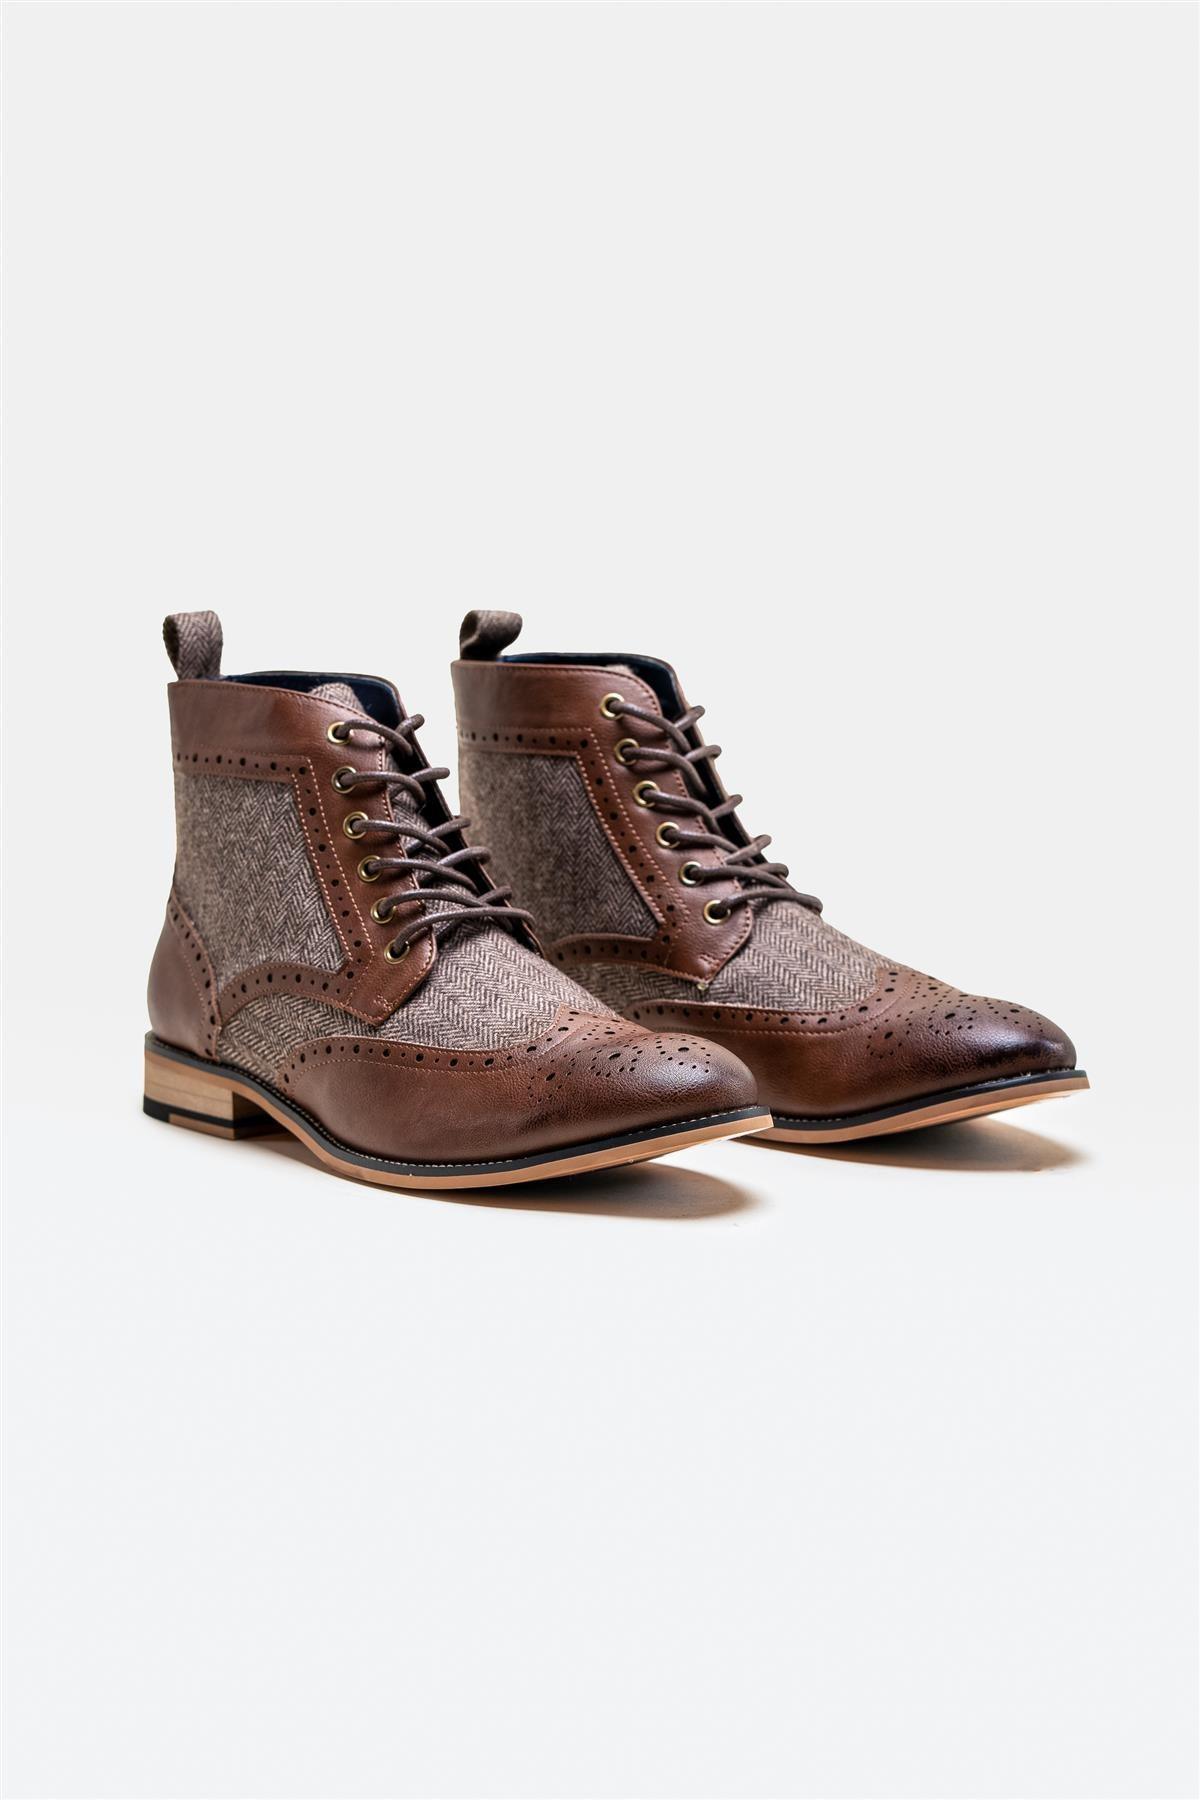 Sherlock brown lace up boot front